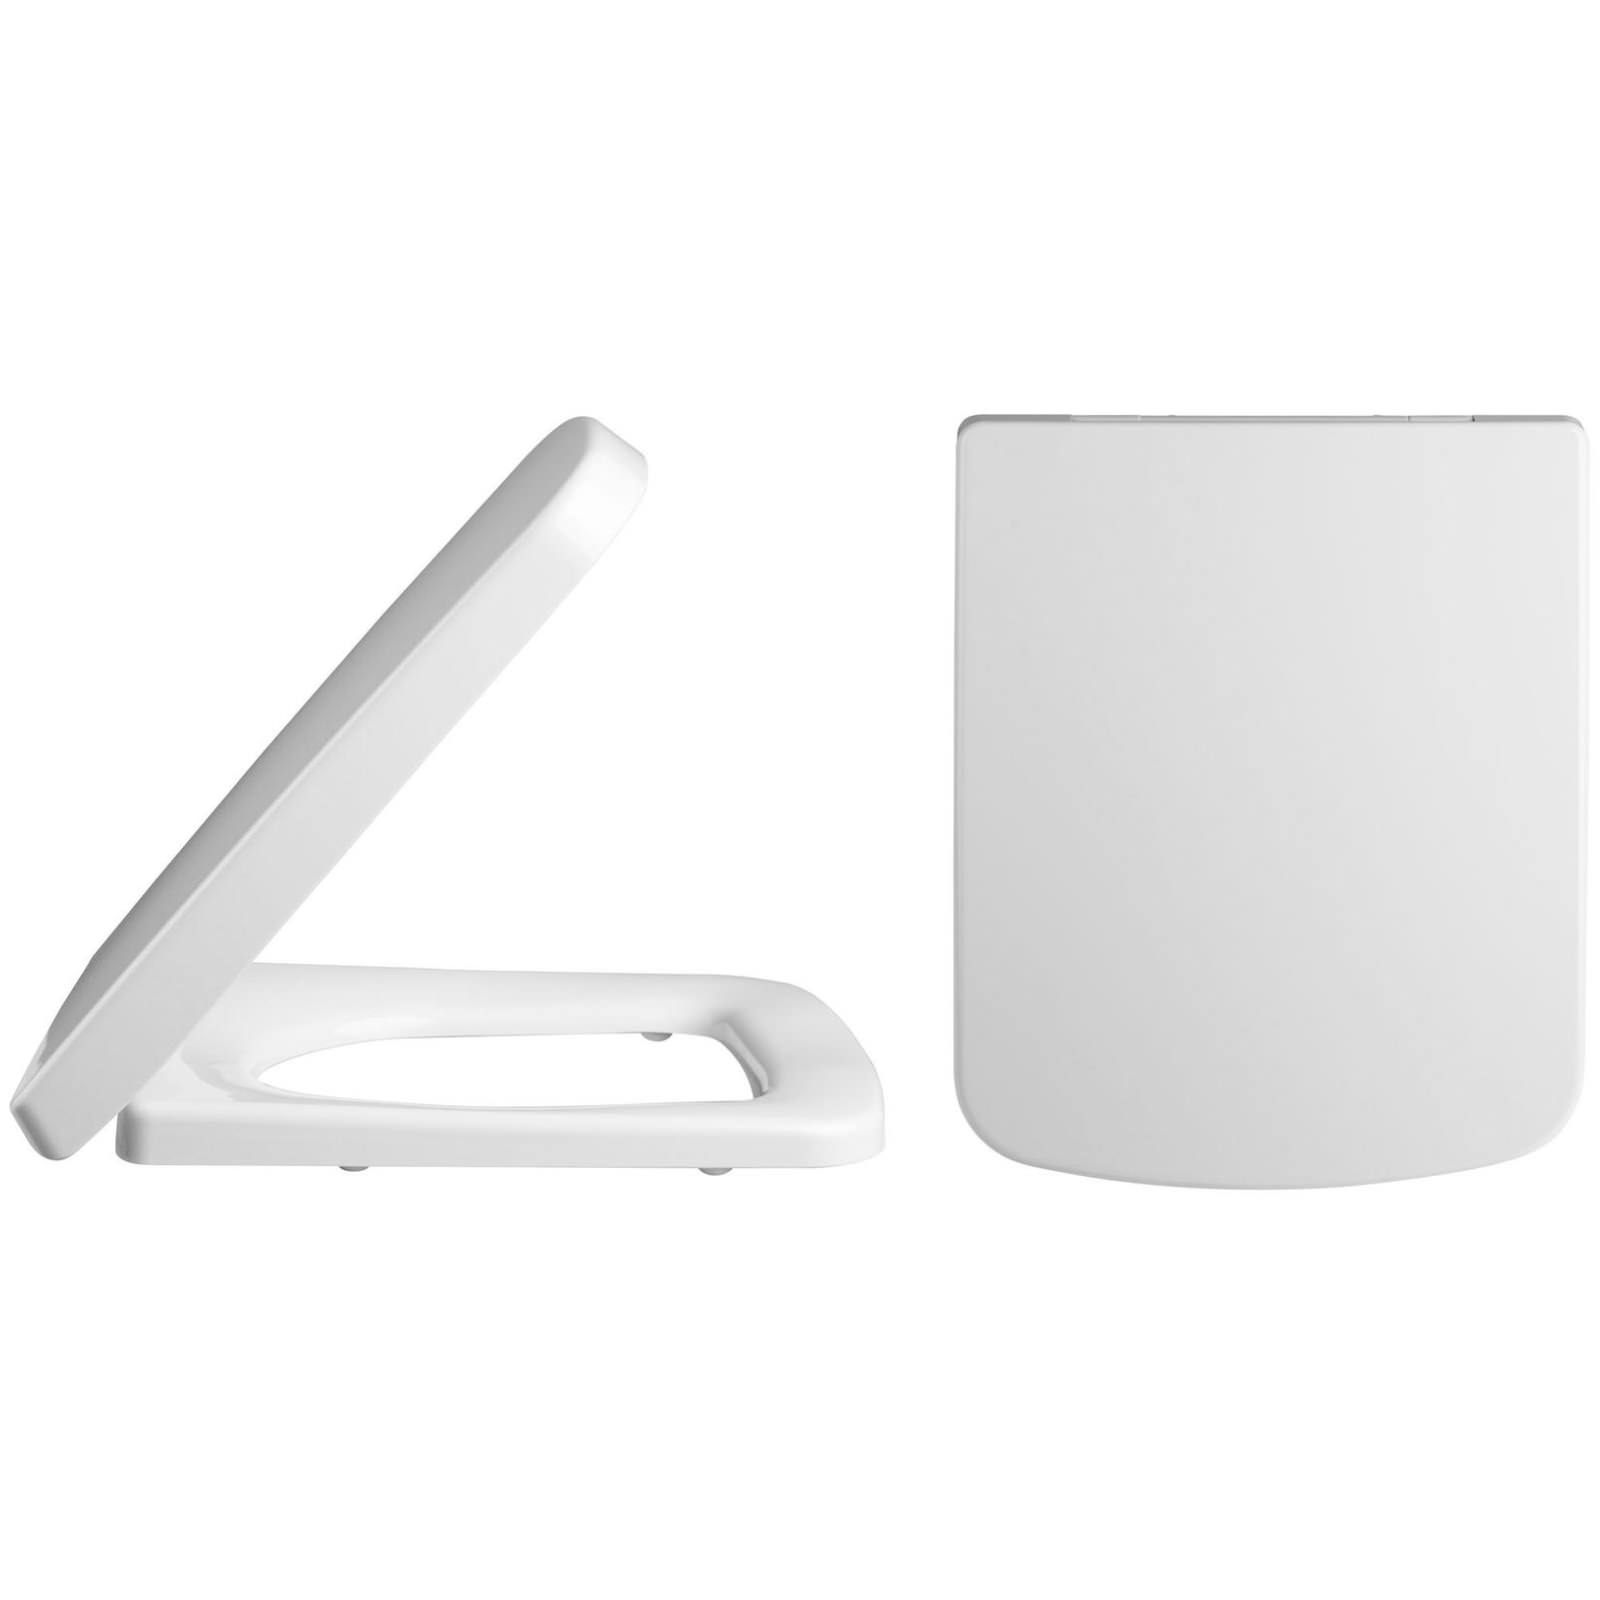 Nuie Standard Square Top Fix Soft Close Toilet Seat And Cover White Nch198 - How Do I Fix My Soft Close Toilet Seat